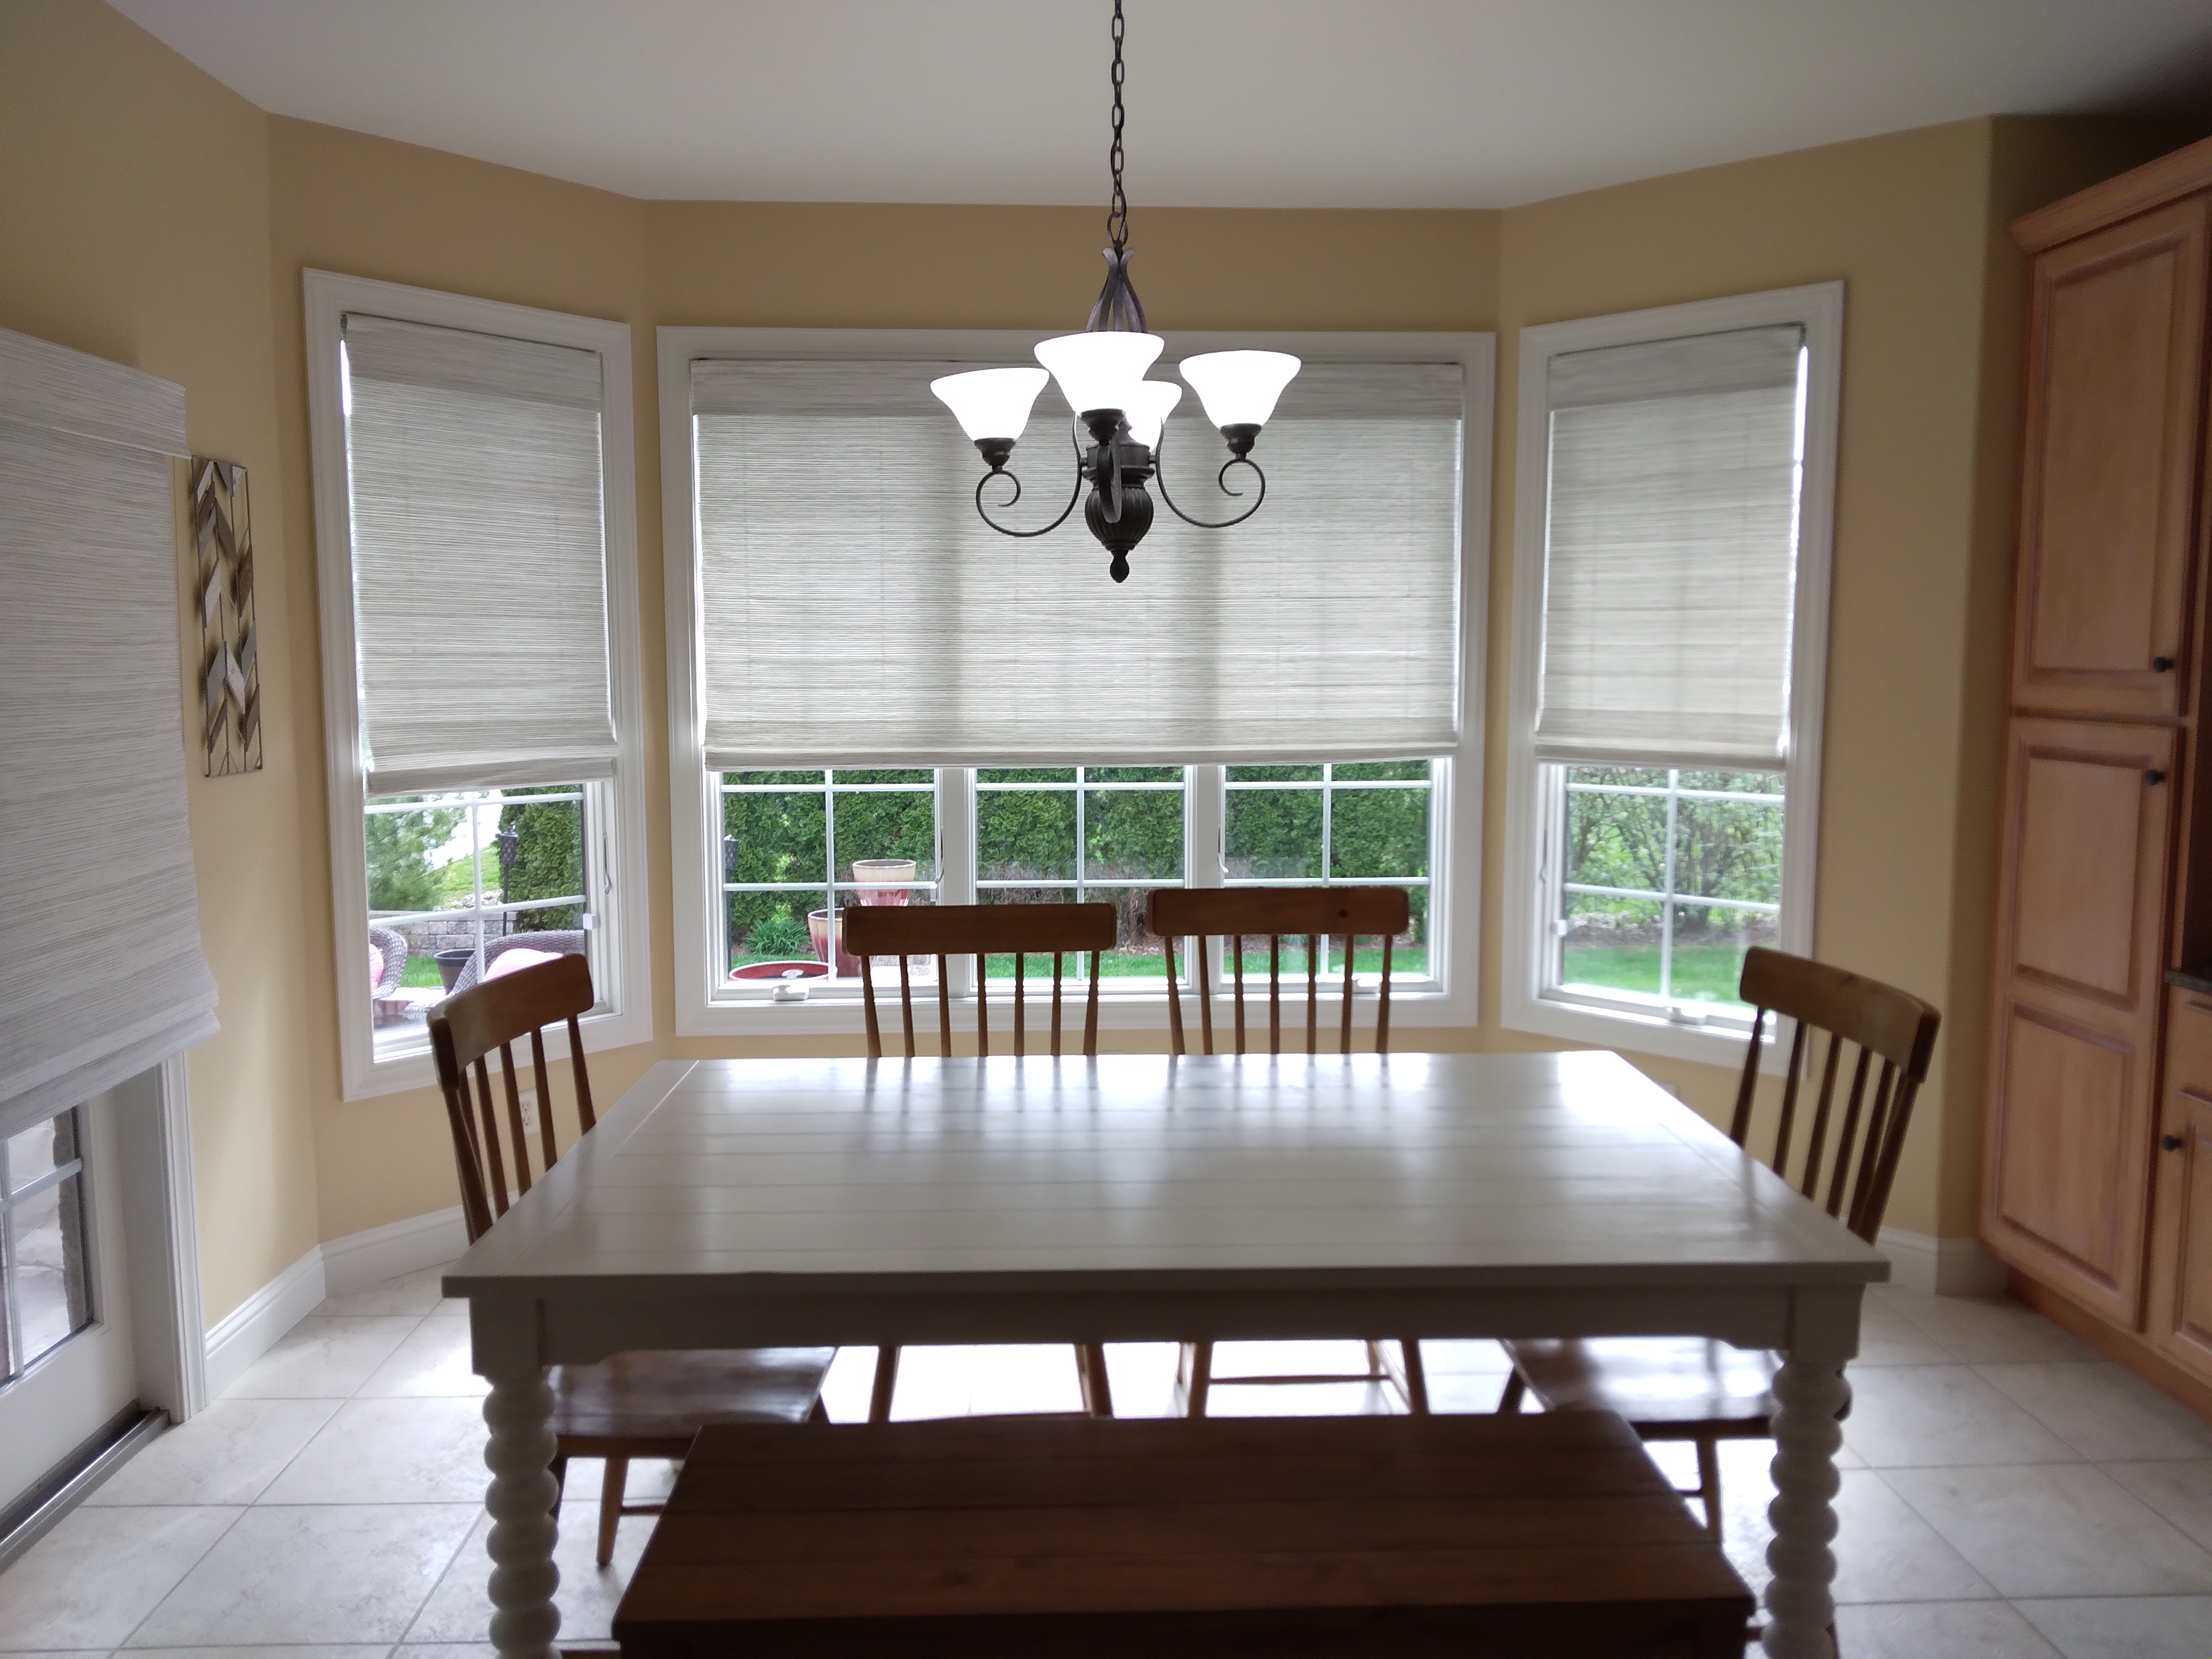 These natural shades in this Springfield Illinois dining room add a lot of style while blending in with the view of the backyard.  BudgetBlinds  WindowCoverings  Shades  NaturalShades  SpringfieldIllinois